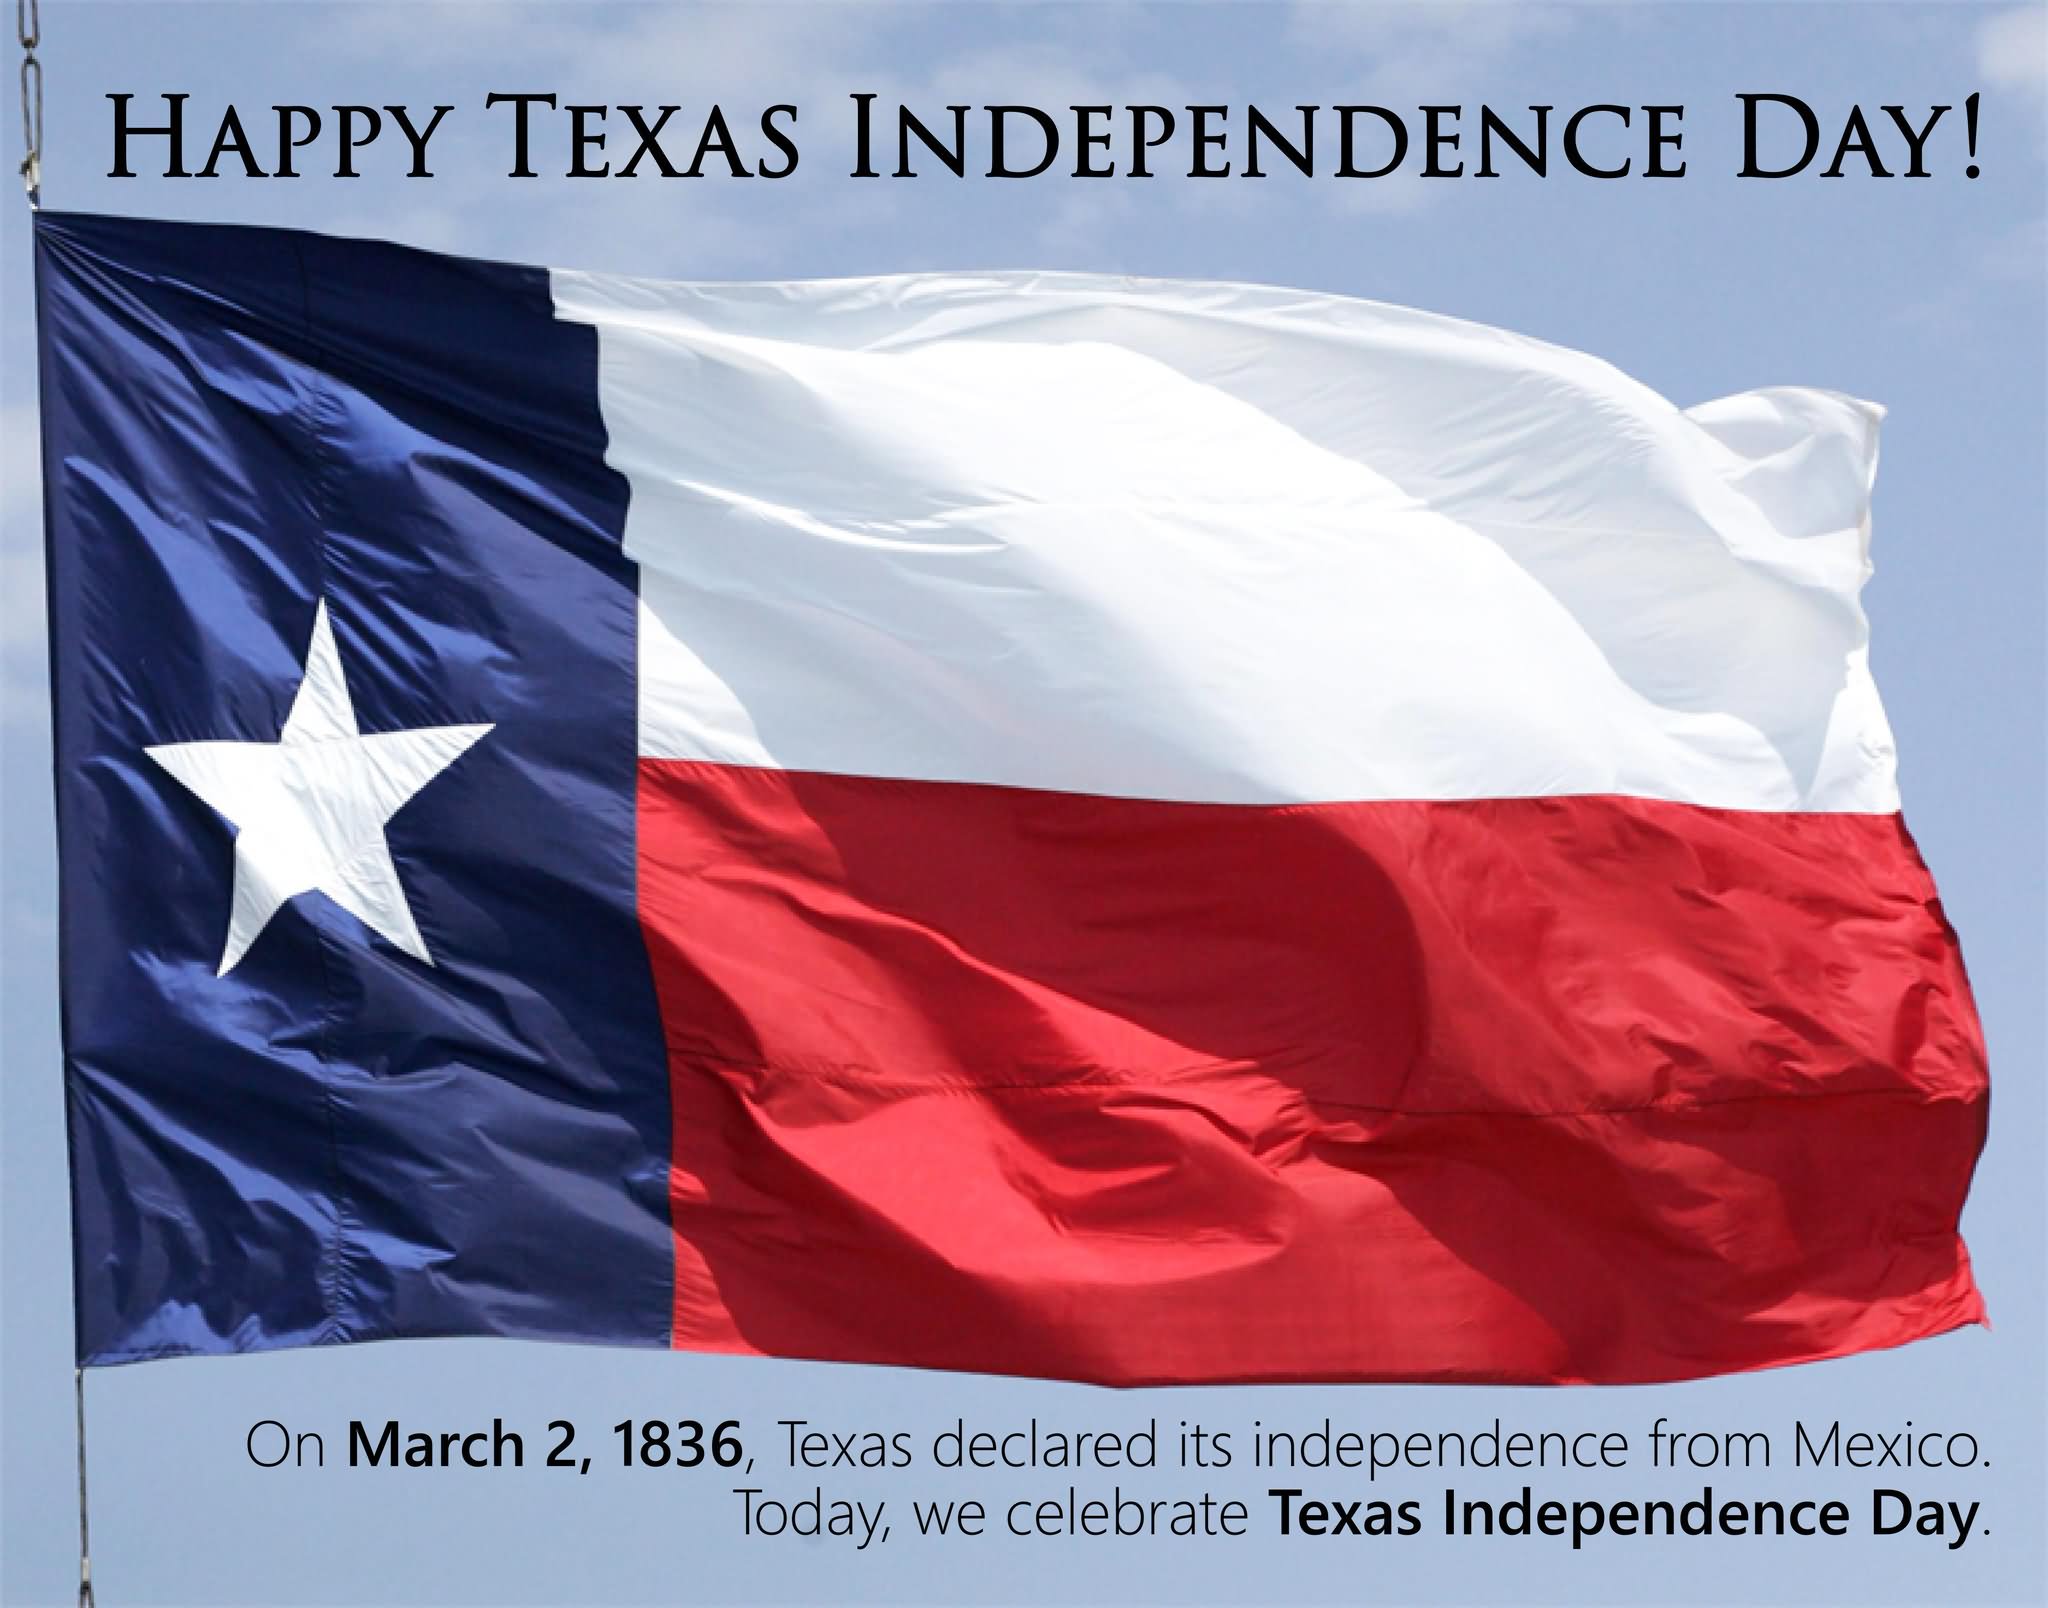 Happy Texas Independence Day on march 2, 1836